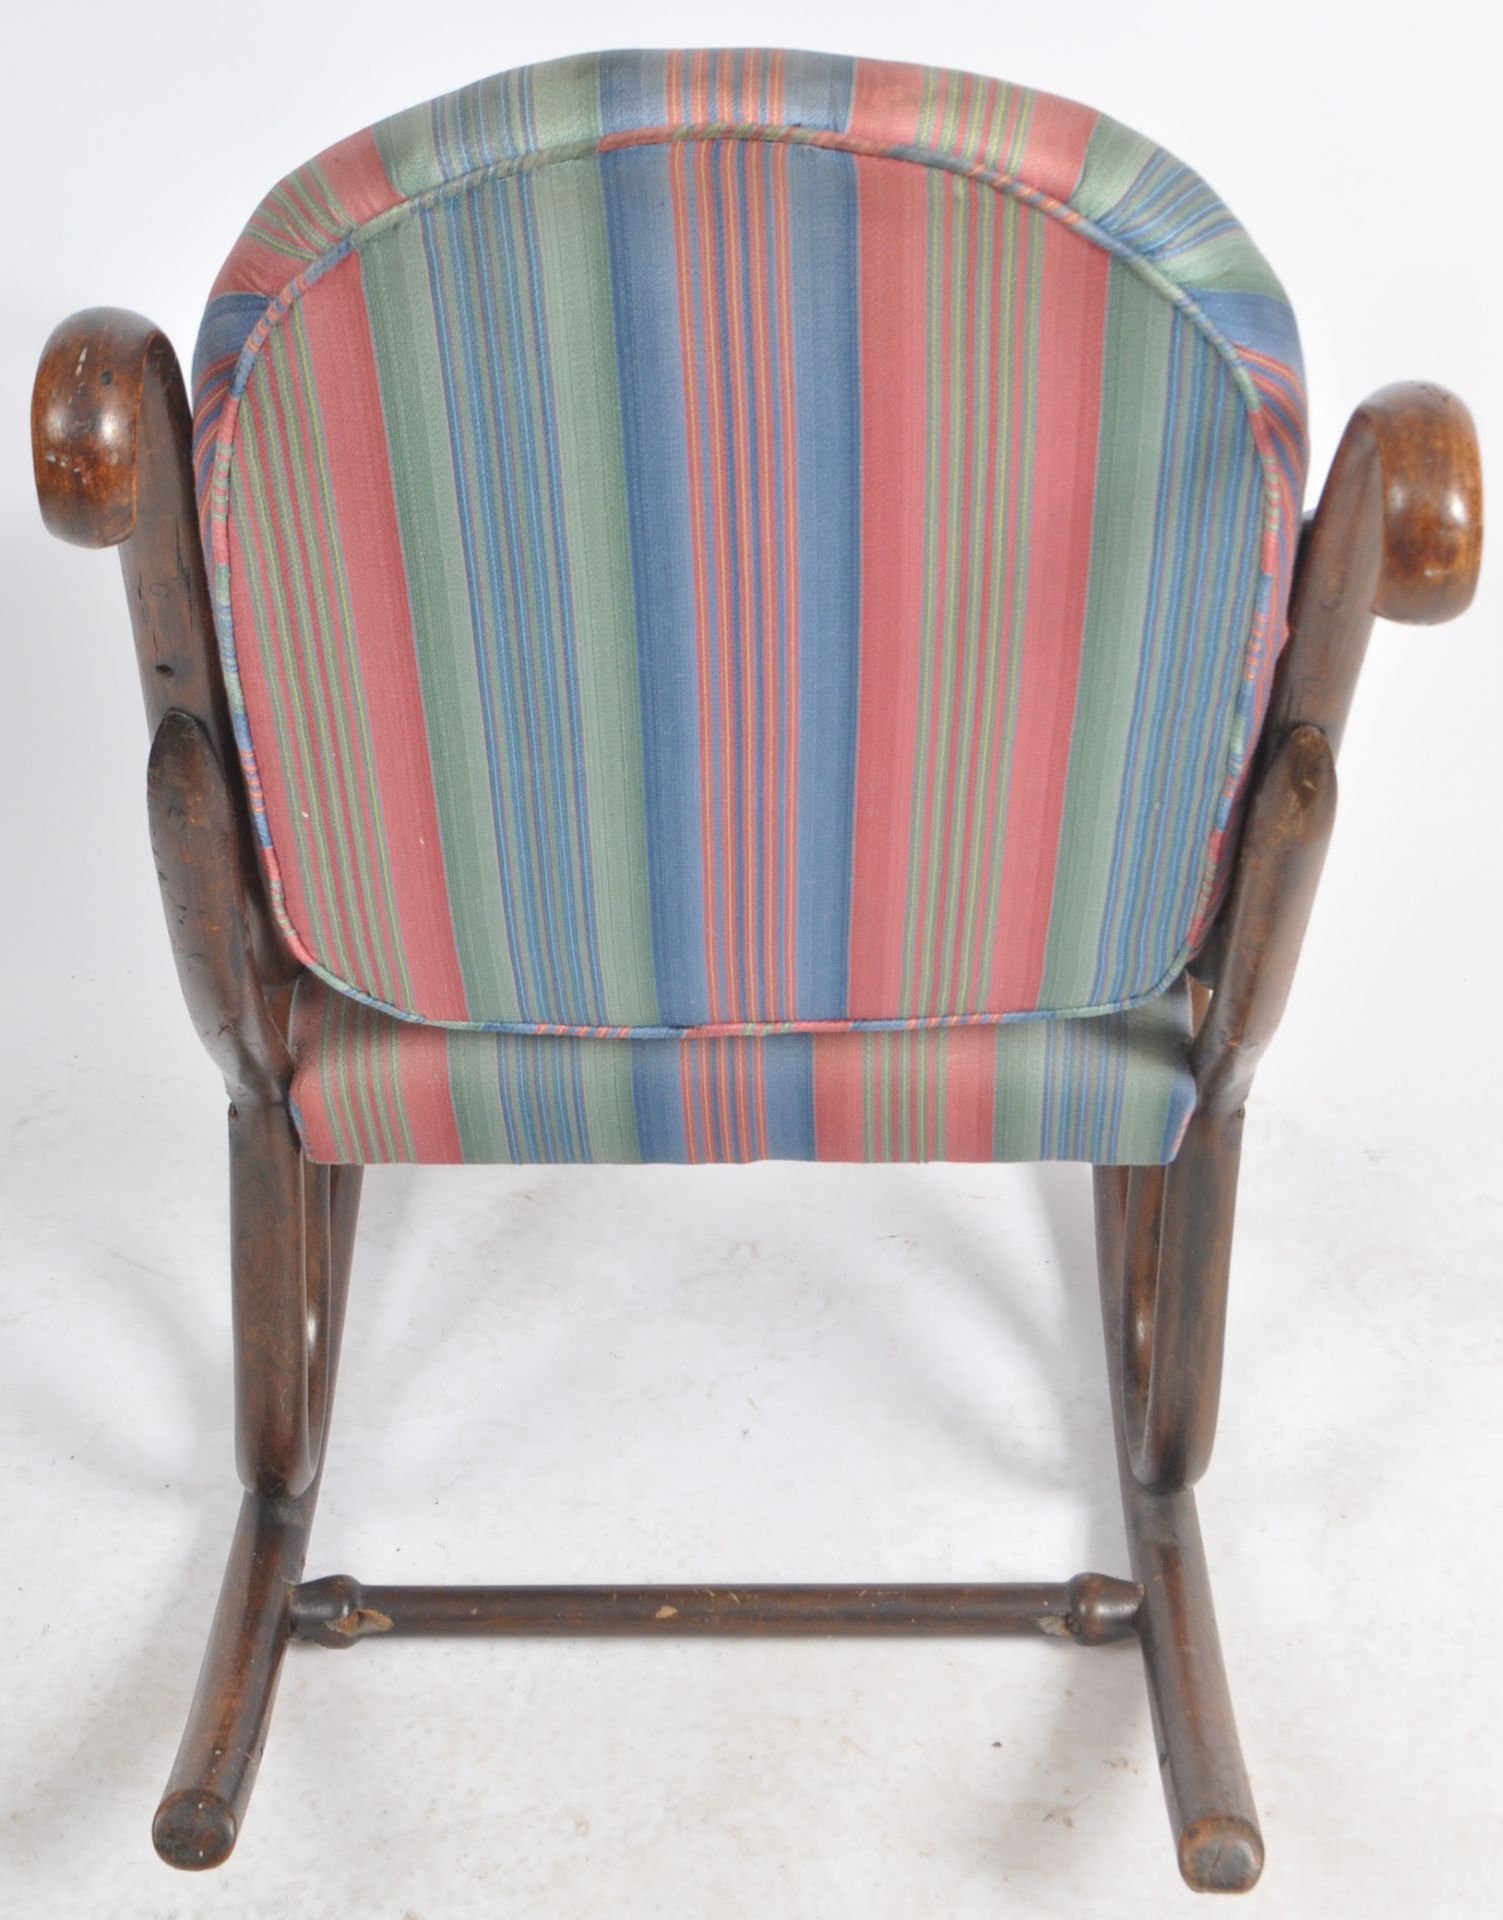 EARLY 20TH CENTURY BENTWOOD ROCKING CHAIR - Image 9 of 10